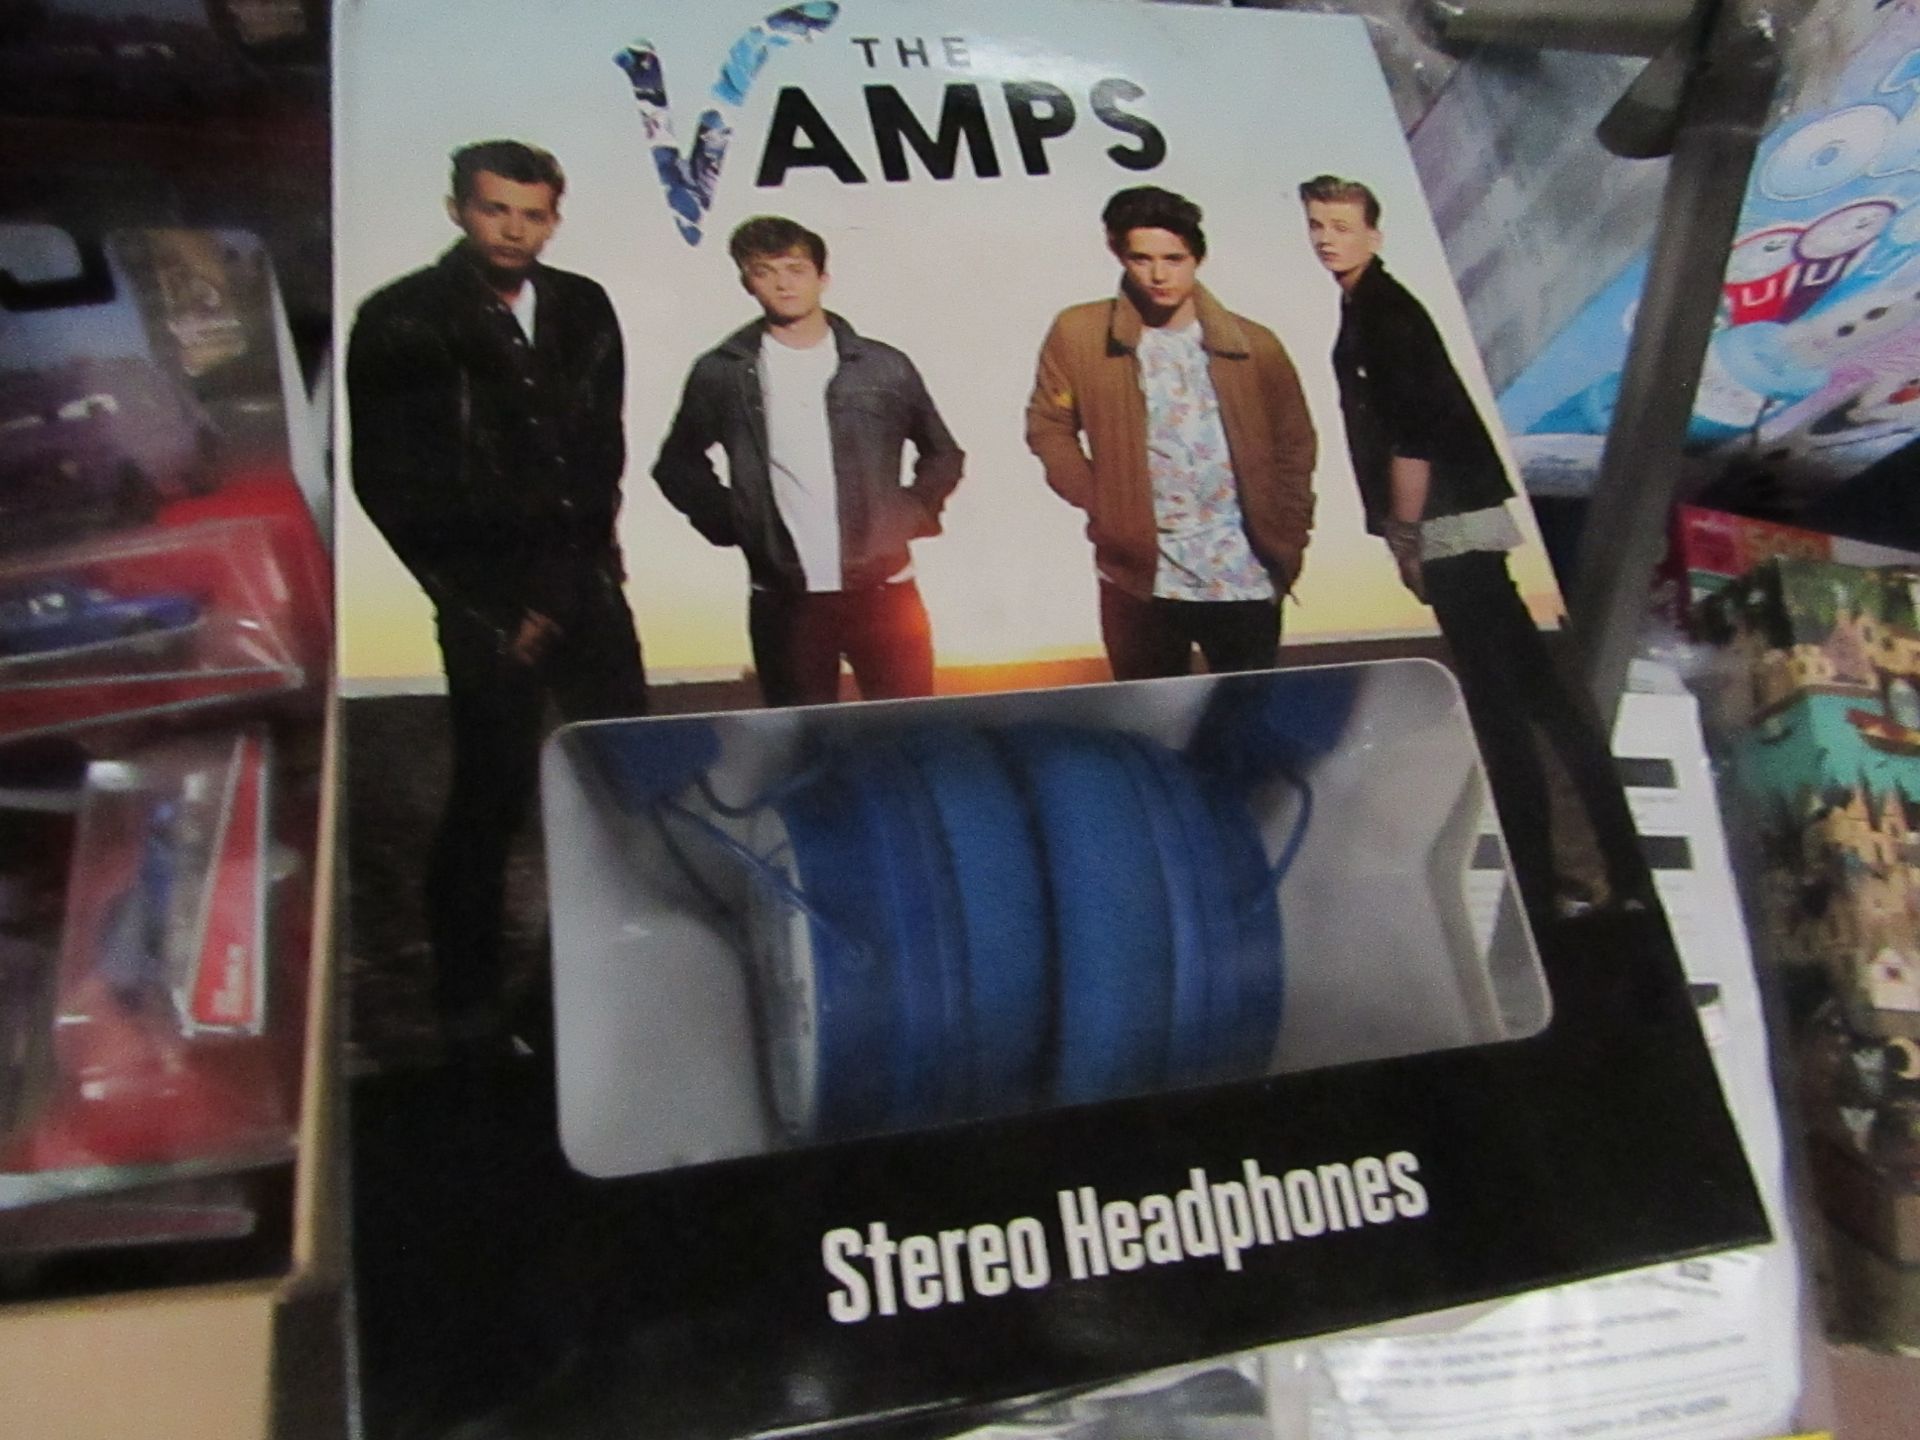 The Vamps Stereo headphones. Look New but untested